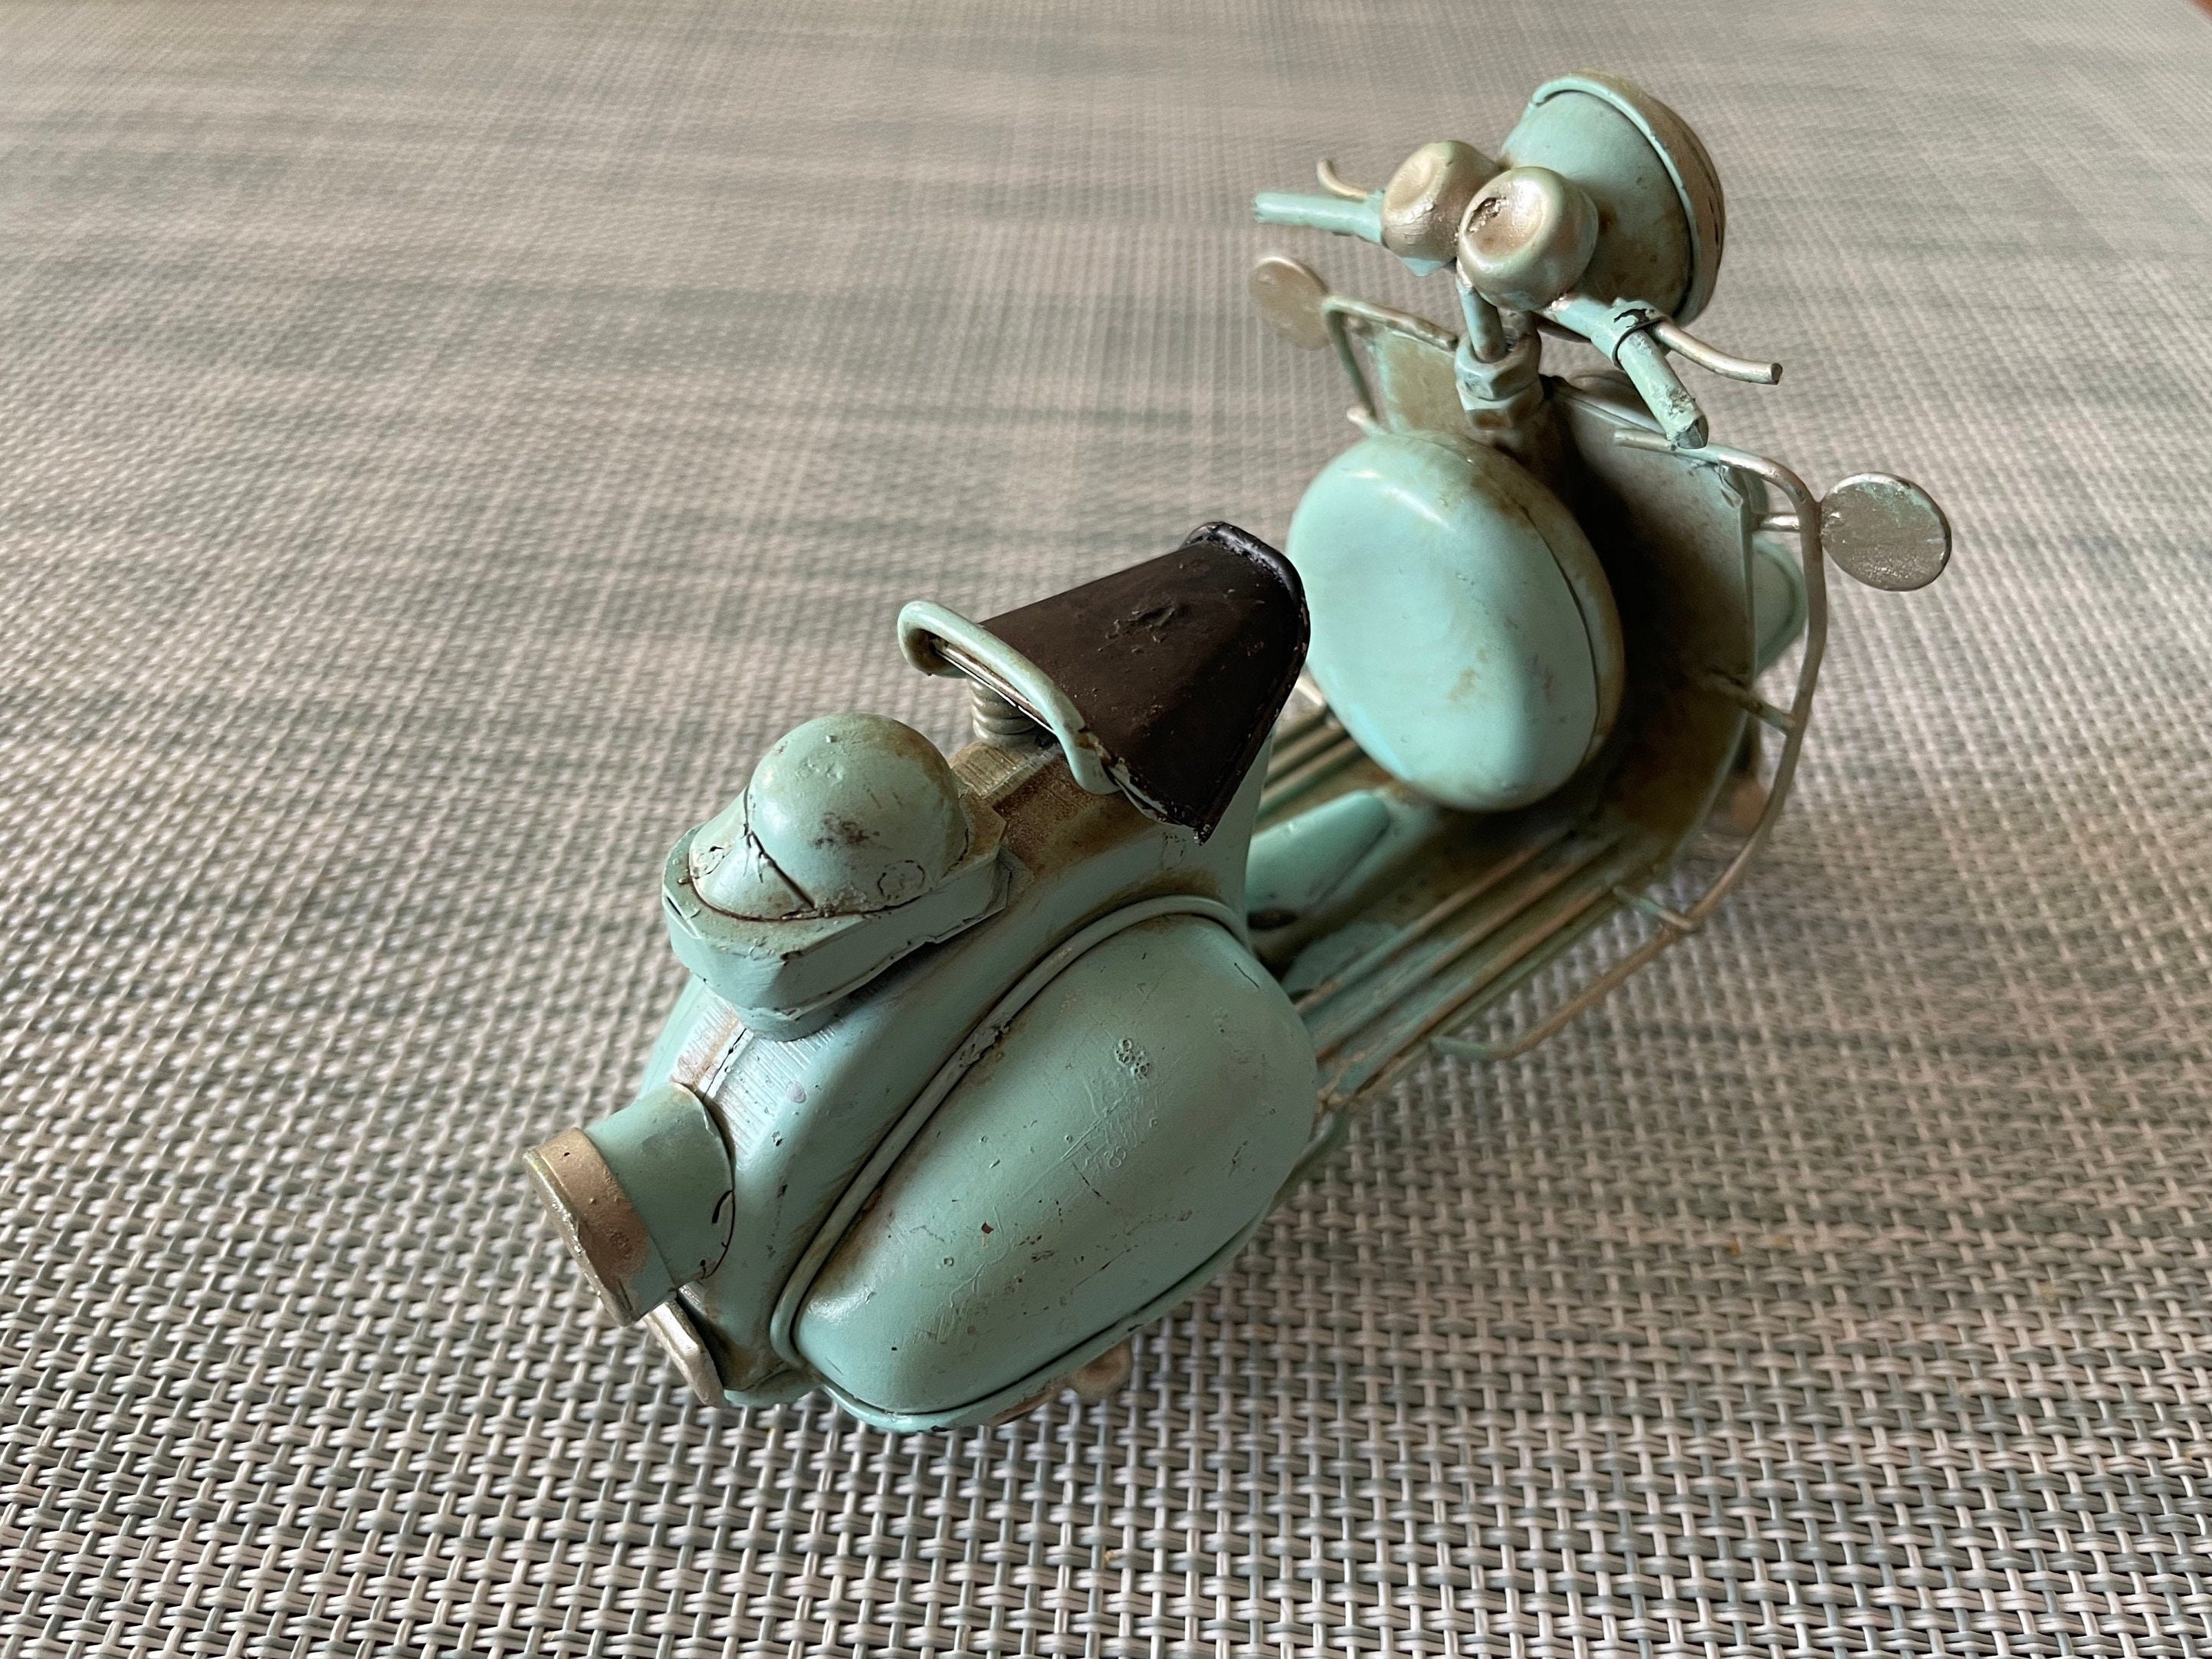 Vintage Motorcycle Scooter Miniature Model Stock Photo 573039808